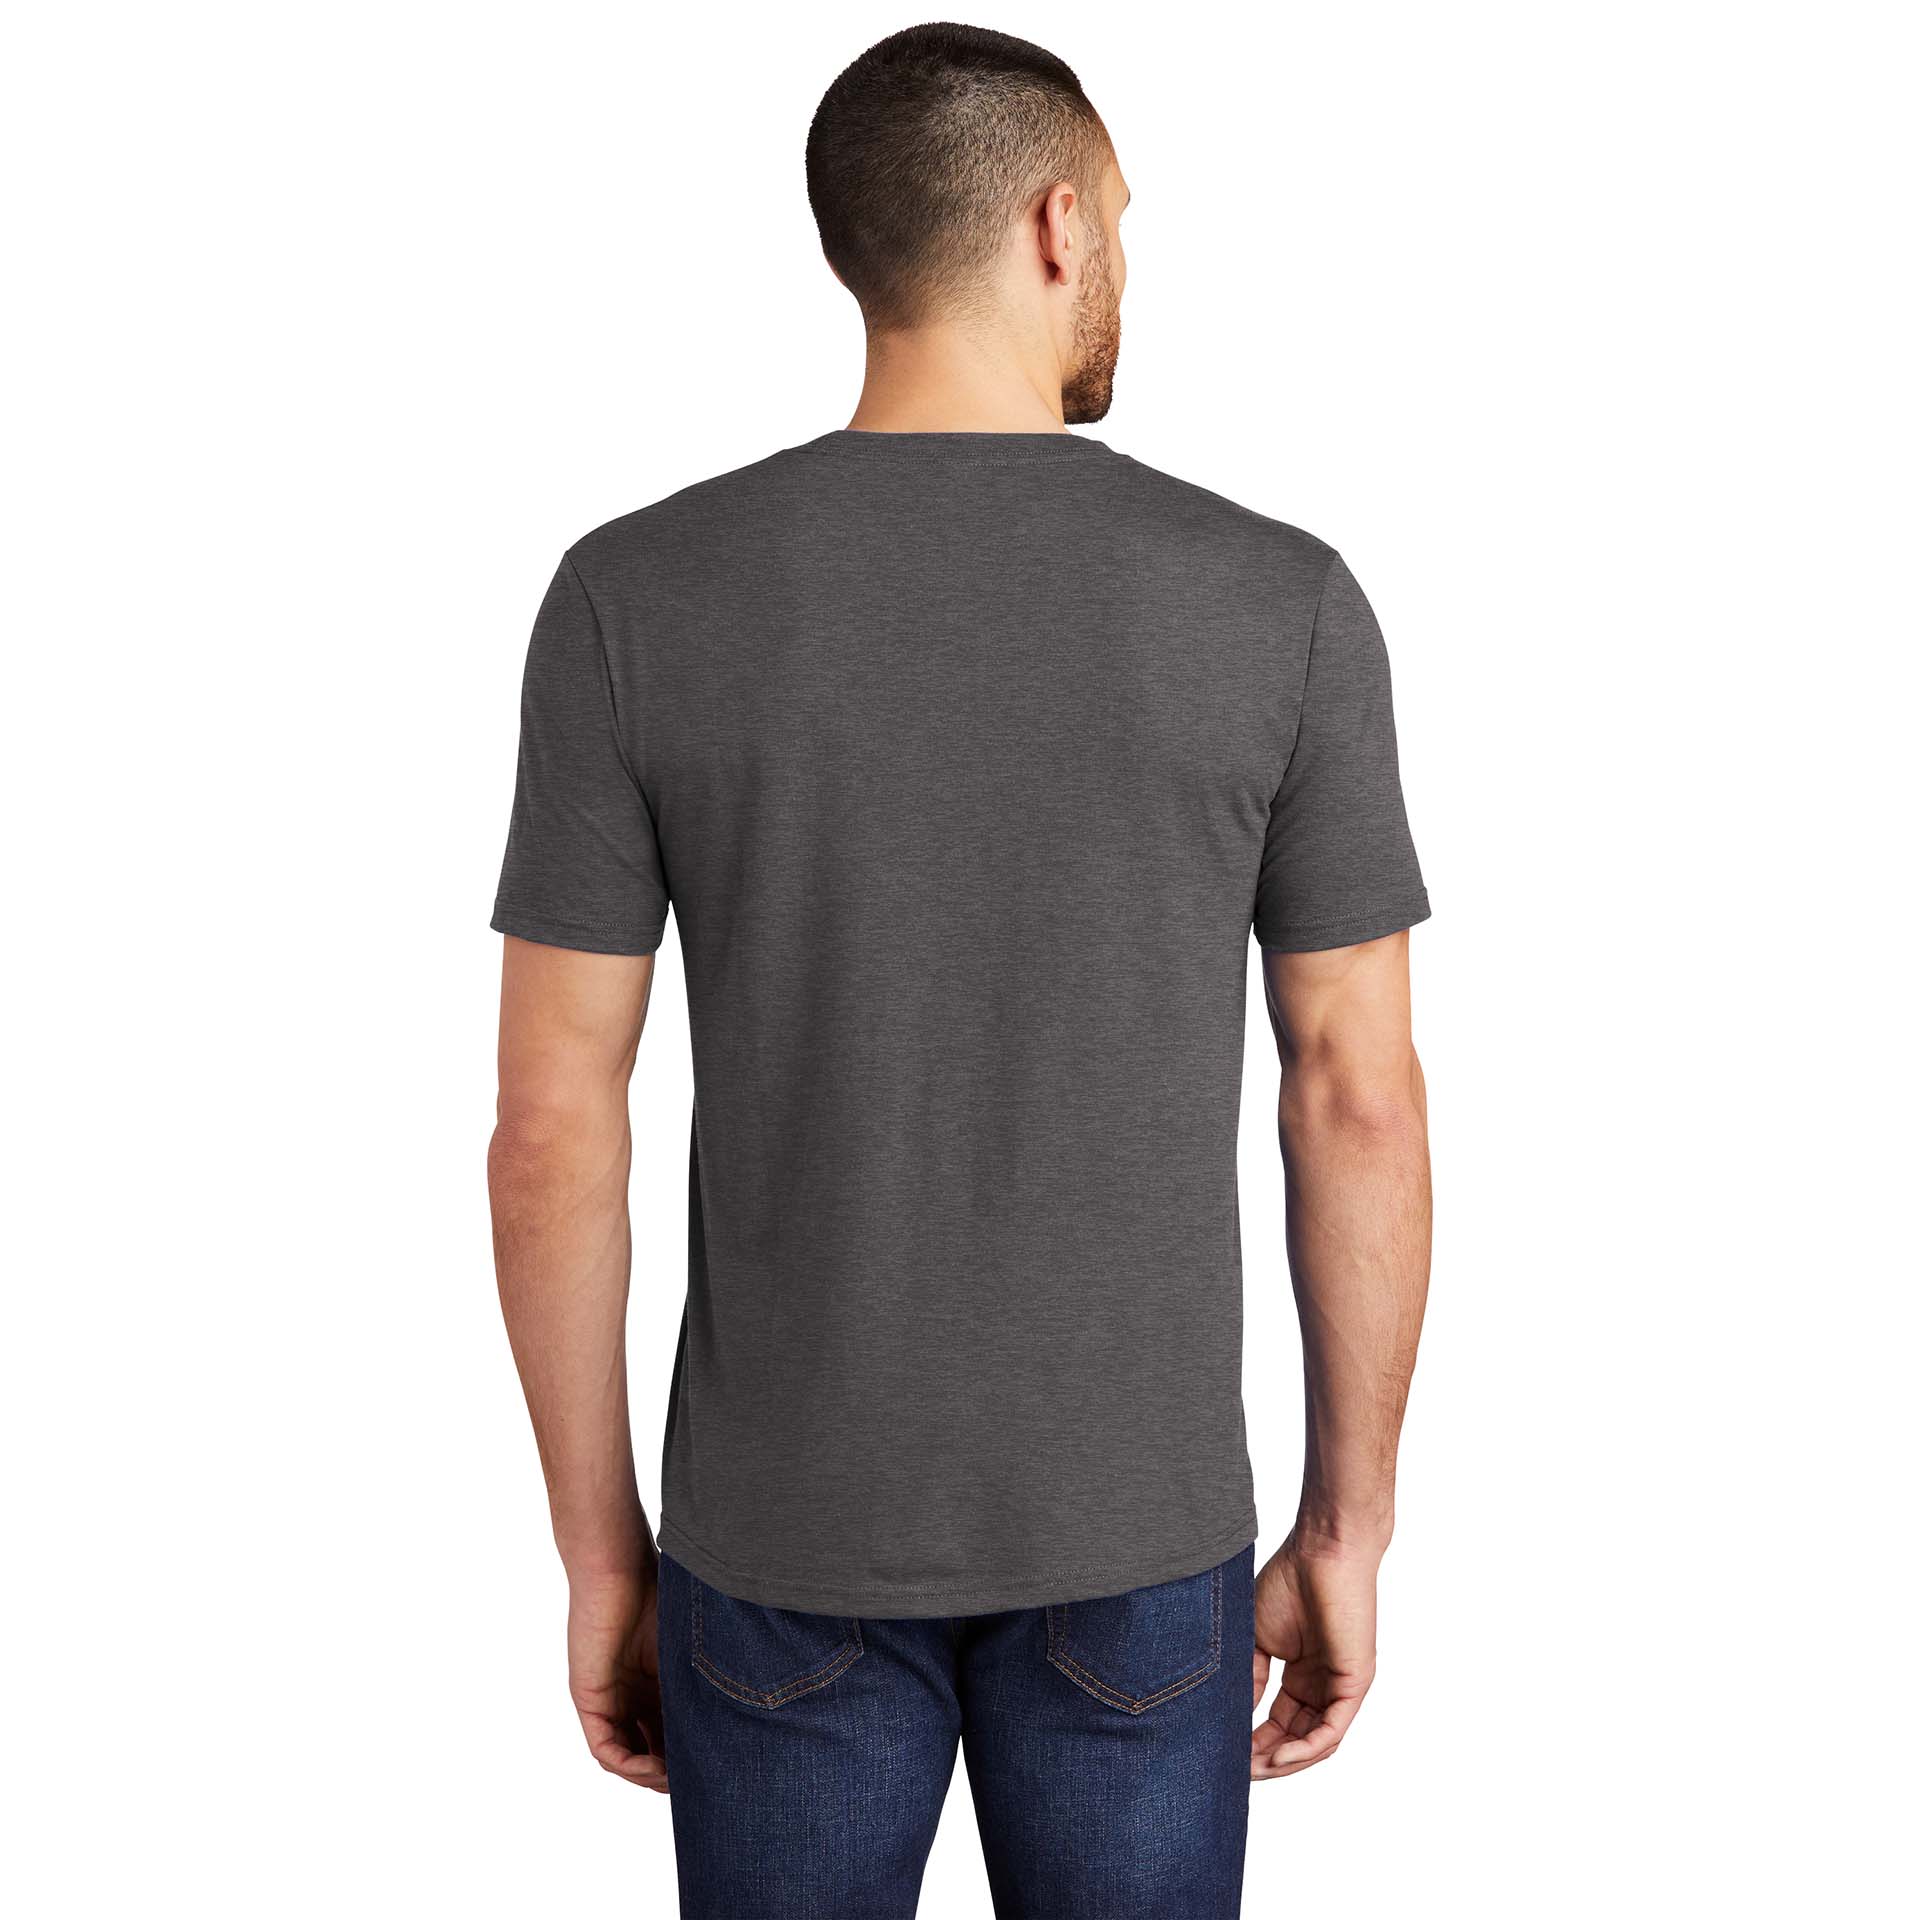 District Made Mens Tri-Blend Pocket Tee, XS, Charcoal Heather